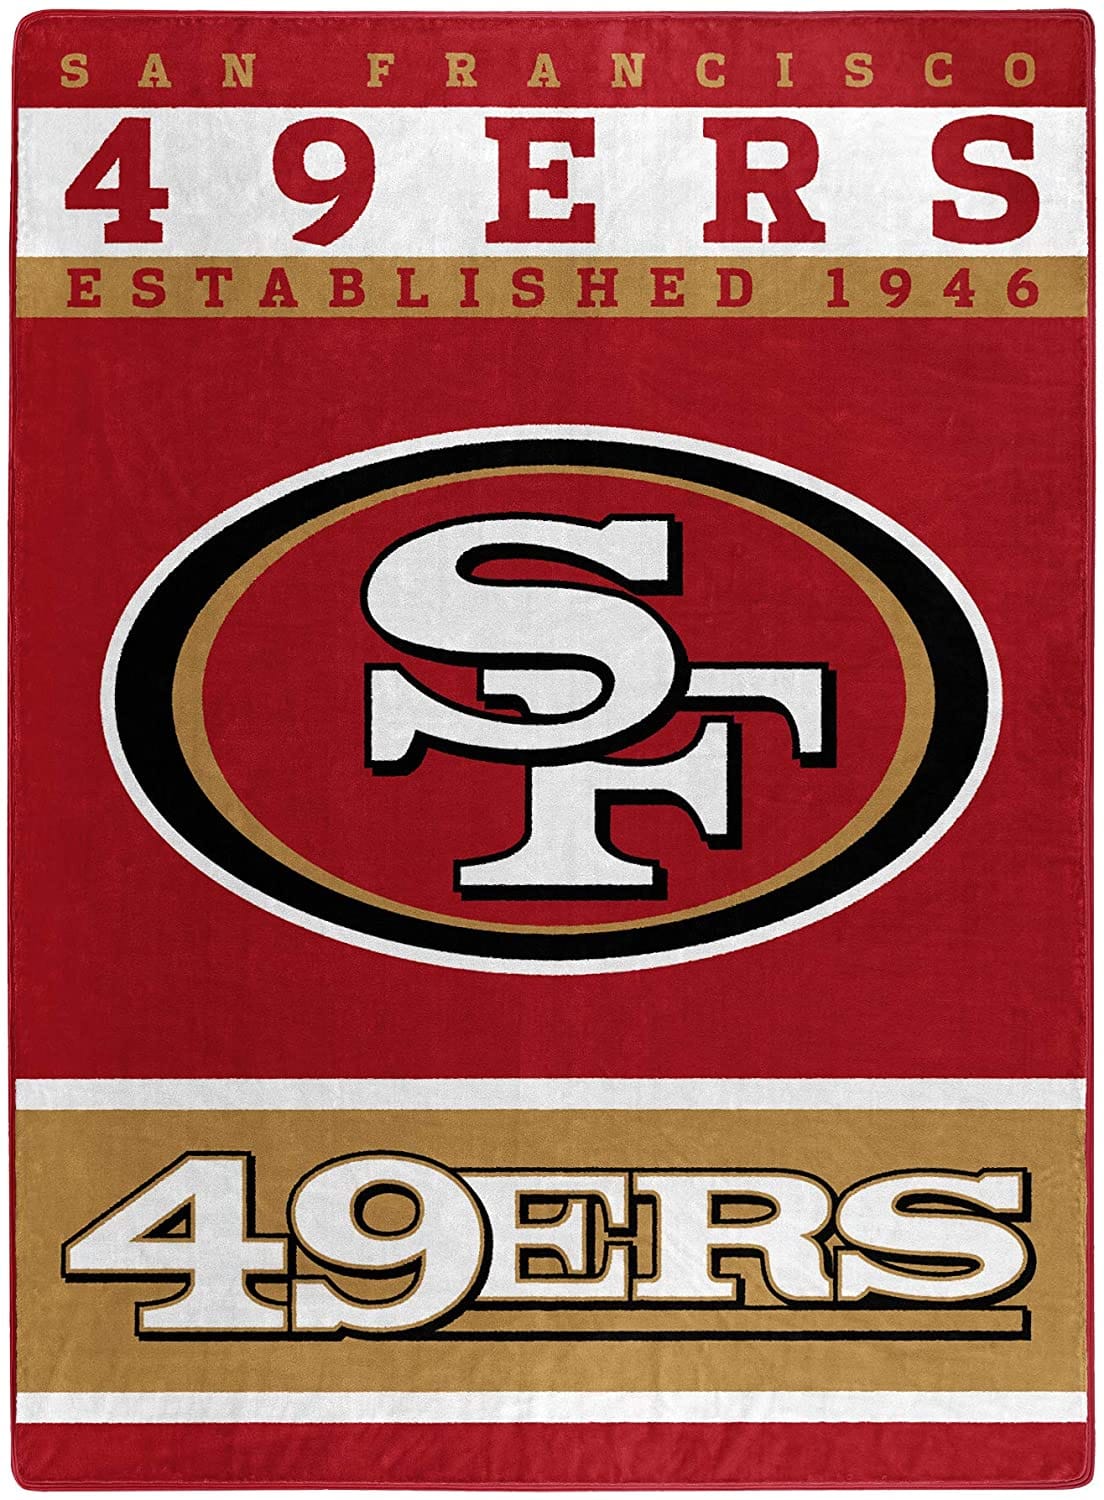 The Officially Licensed Nfl Throw San Francisco 49Ers Fleece Blanket